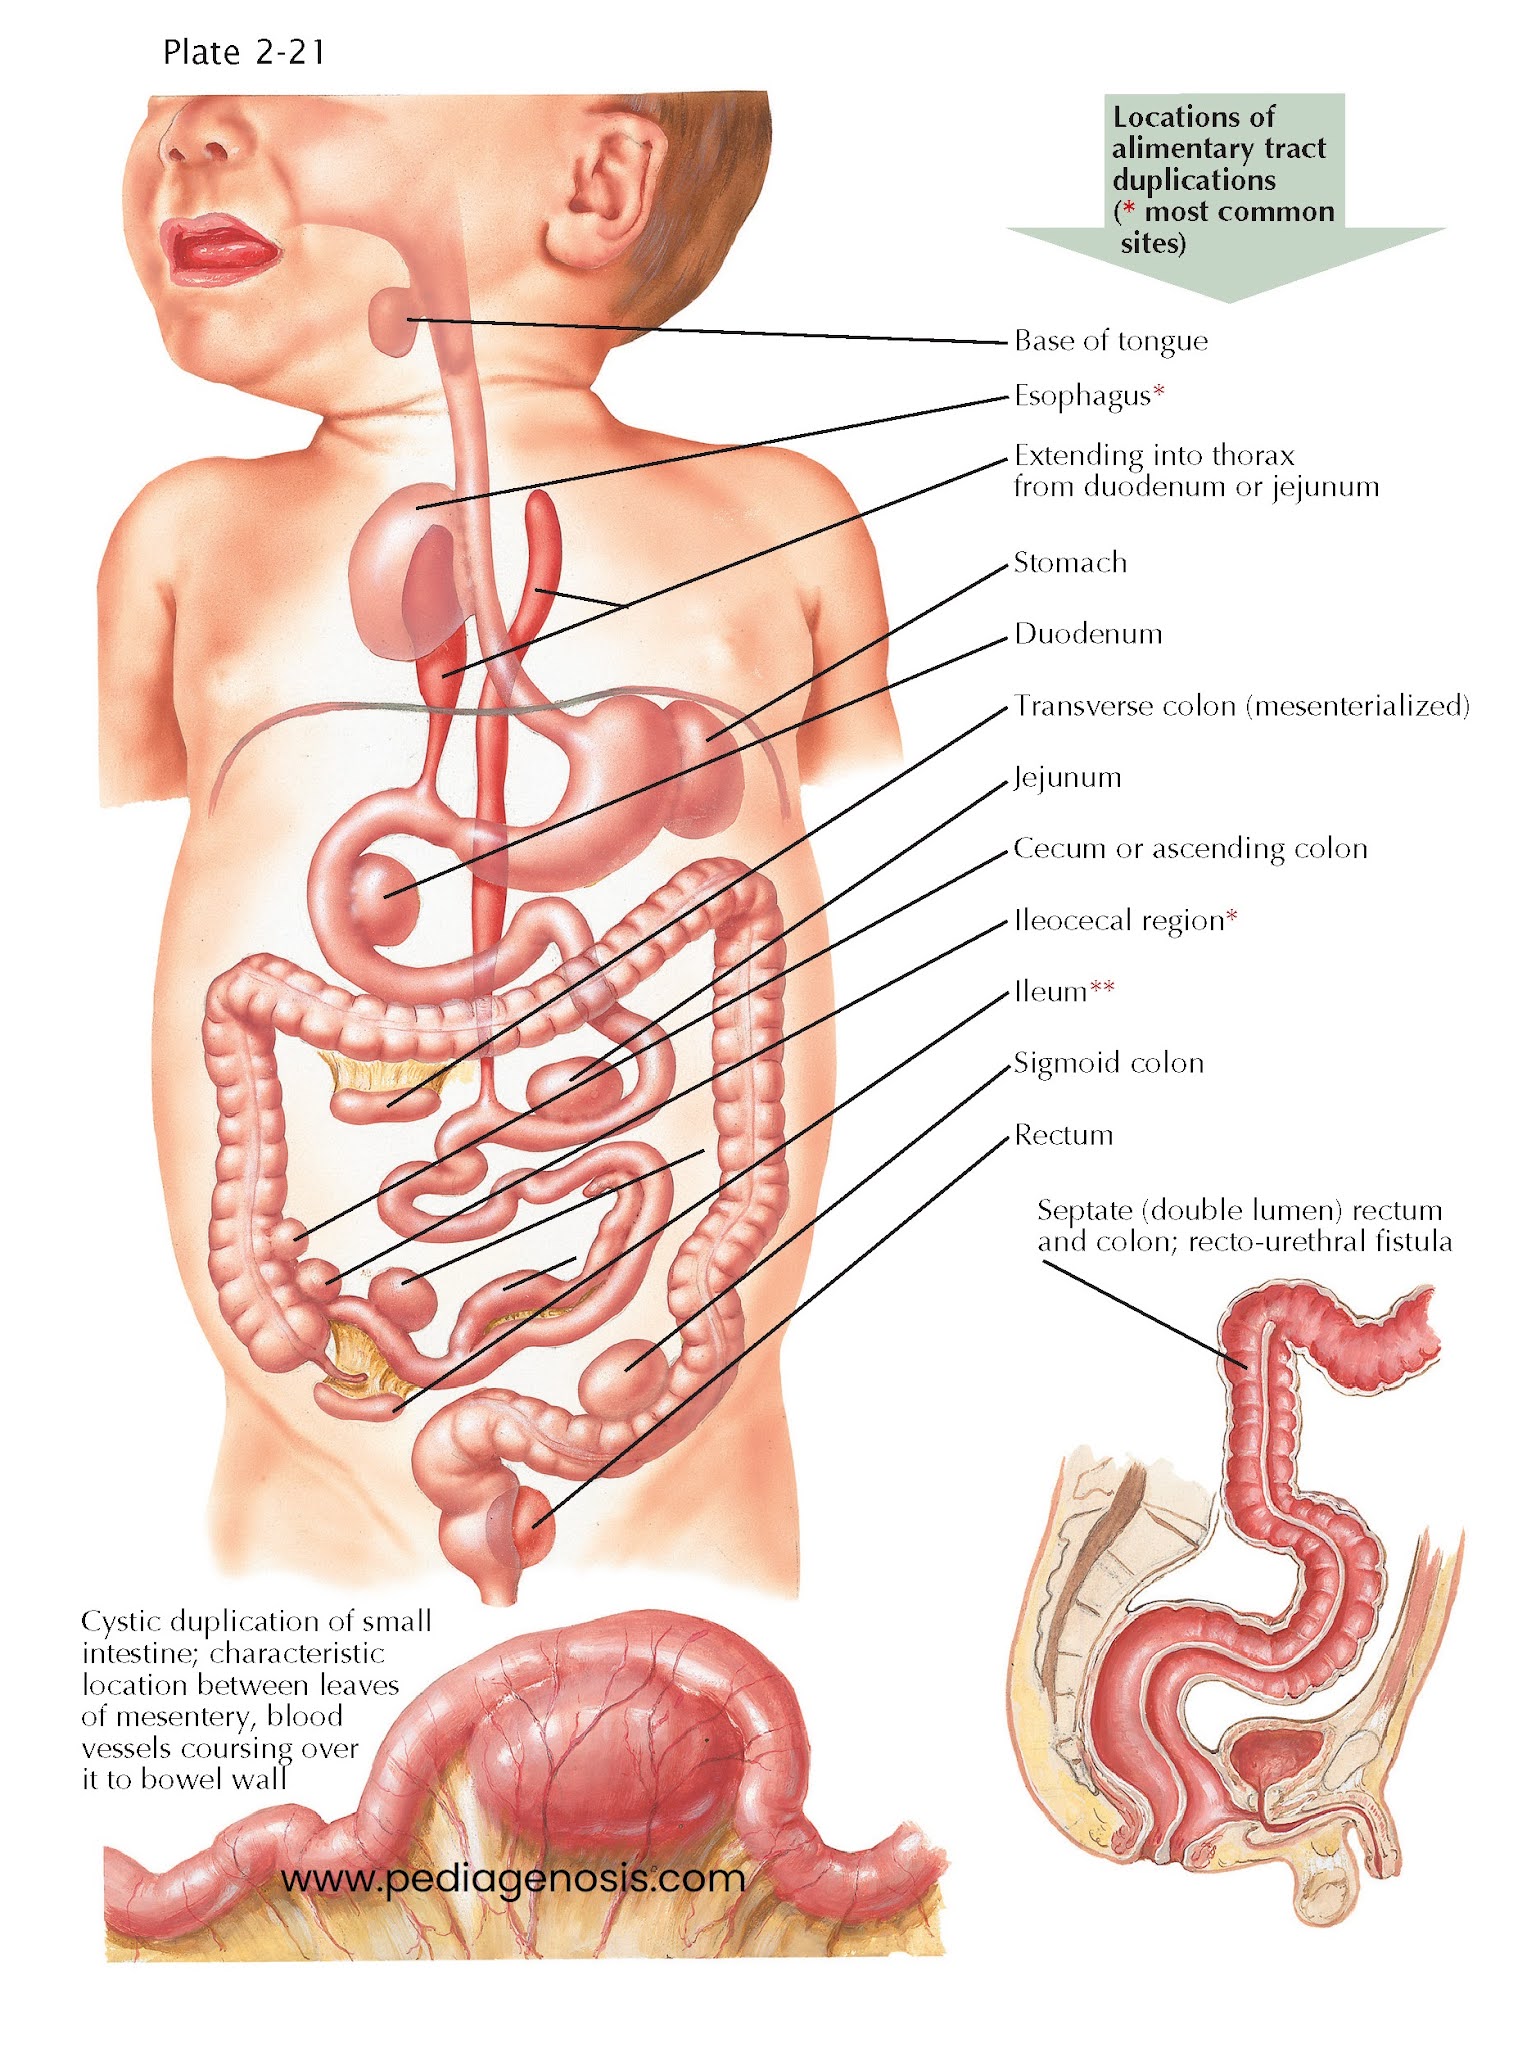 Duplications of Alimentary Tract